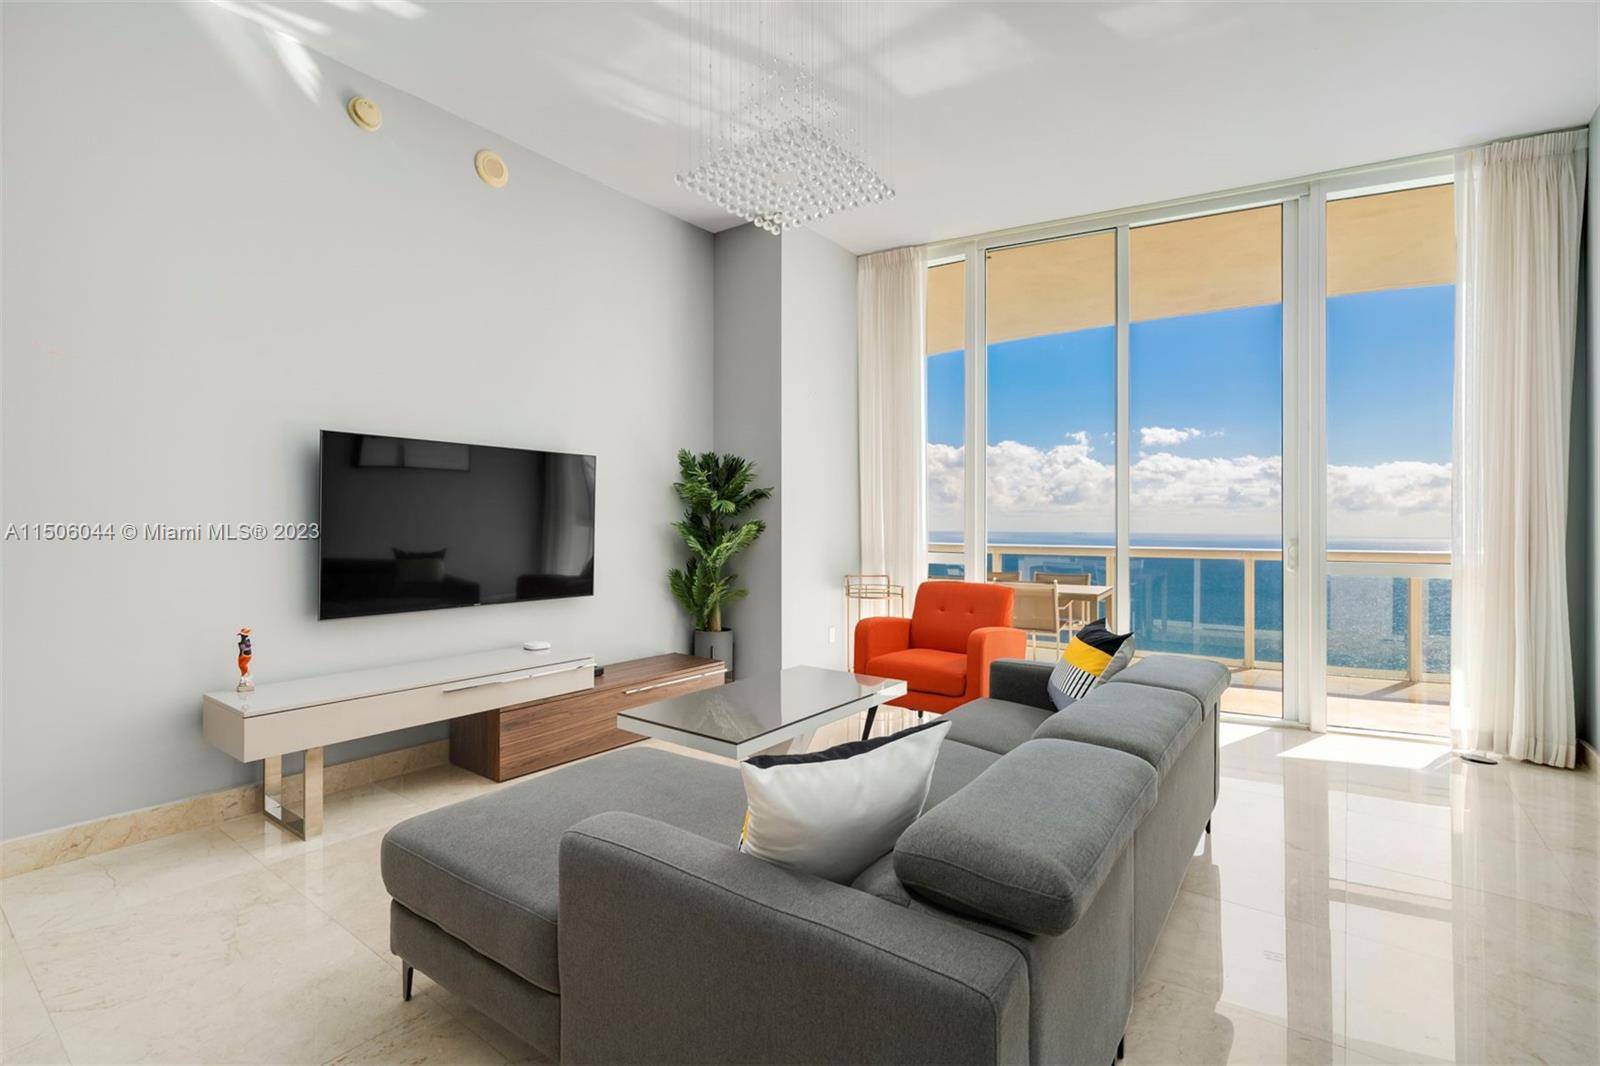 A beautifully furnished 3 Bed 3 Bath condo at the luxurious Trump Tower II in Sunny Isles Beach w breathtaking views of the Atlantic Ocean from every room.